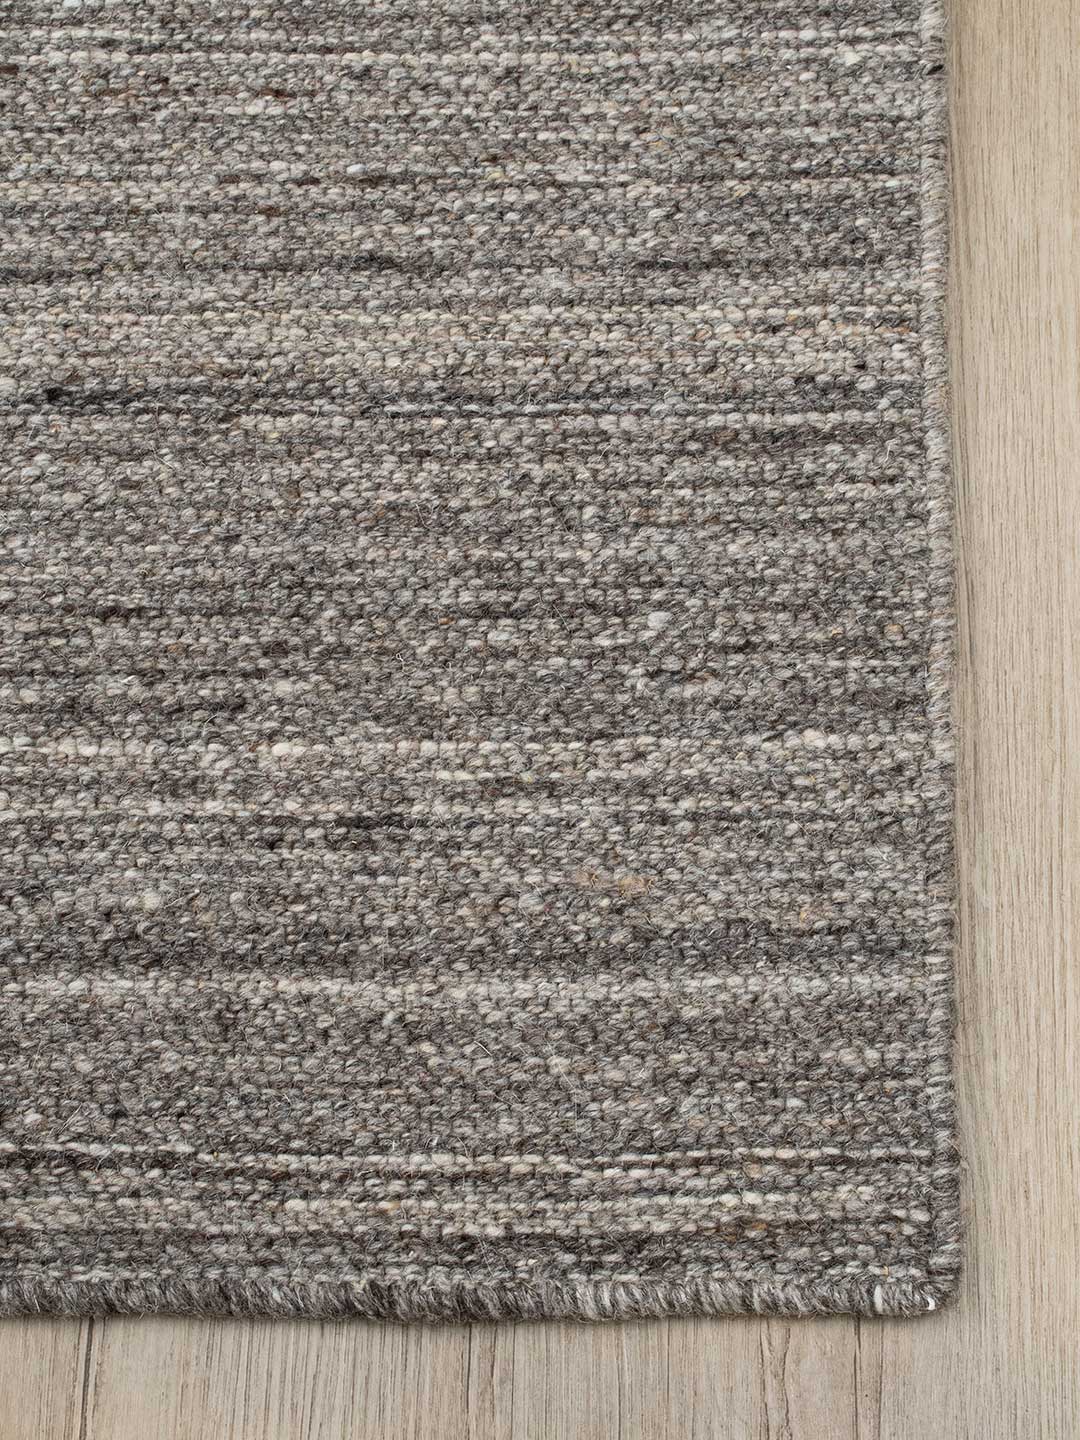 Layla Berber Rug 20% off from the Rug Collection Stockist Make Your House A Home, Furniture Store Bendigo. Free Australia Wide Delivery